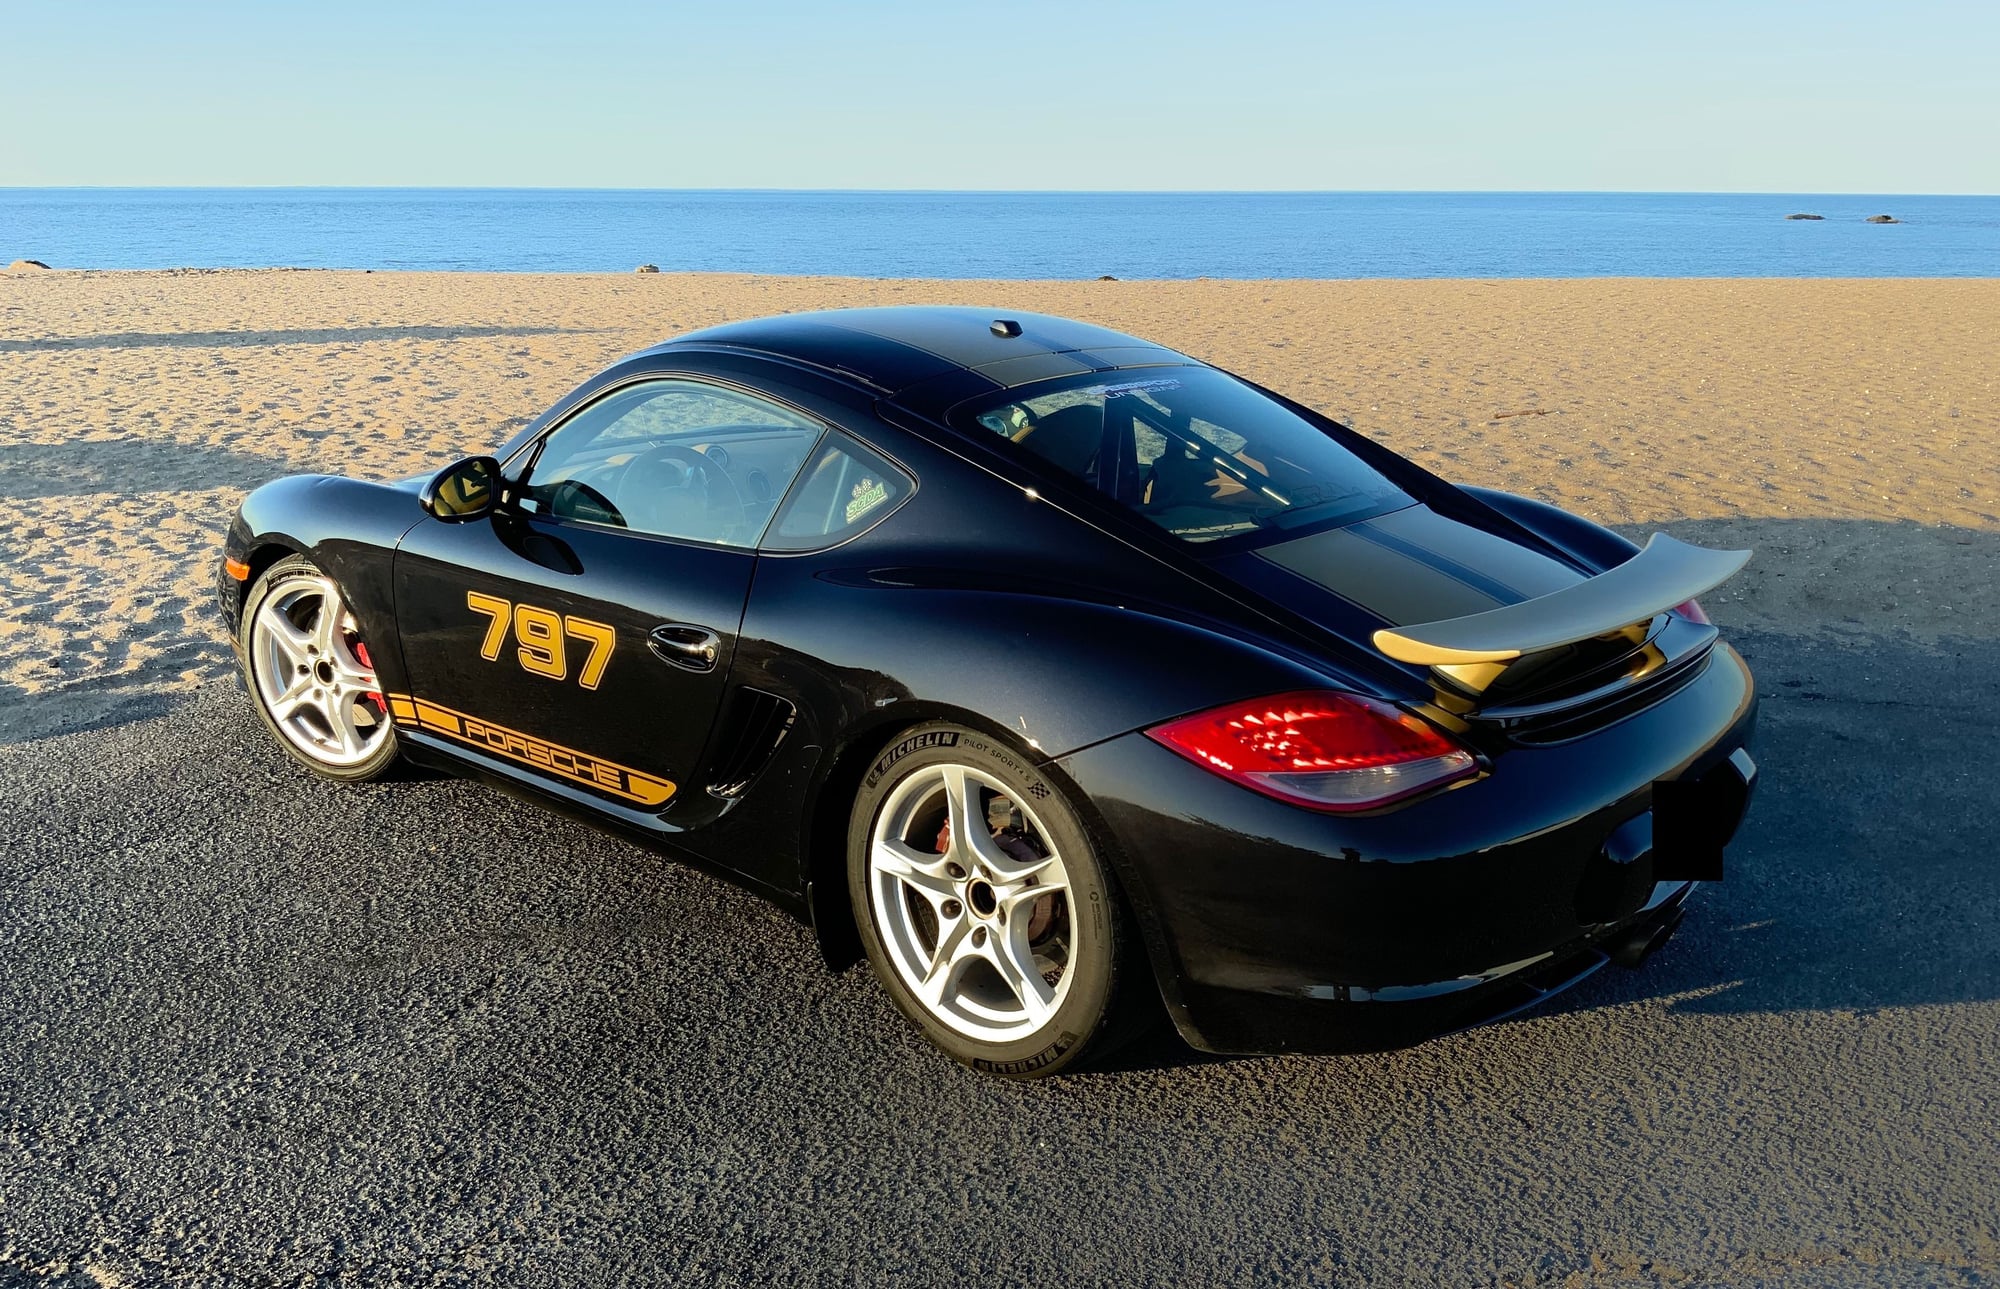 2009 Porsche Cayman - 2009 Porsche Cayman S PDK 987.2, Street-Legal, Track-Prepped, $100K+ invested - Used - VIN 2012041444 - 41,000 Miles - 6 cyl - 2WD - Automatic - Coupe - Black - Guilford, CT 06437, United States